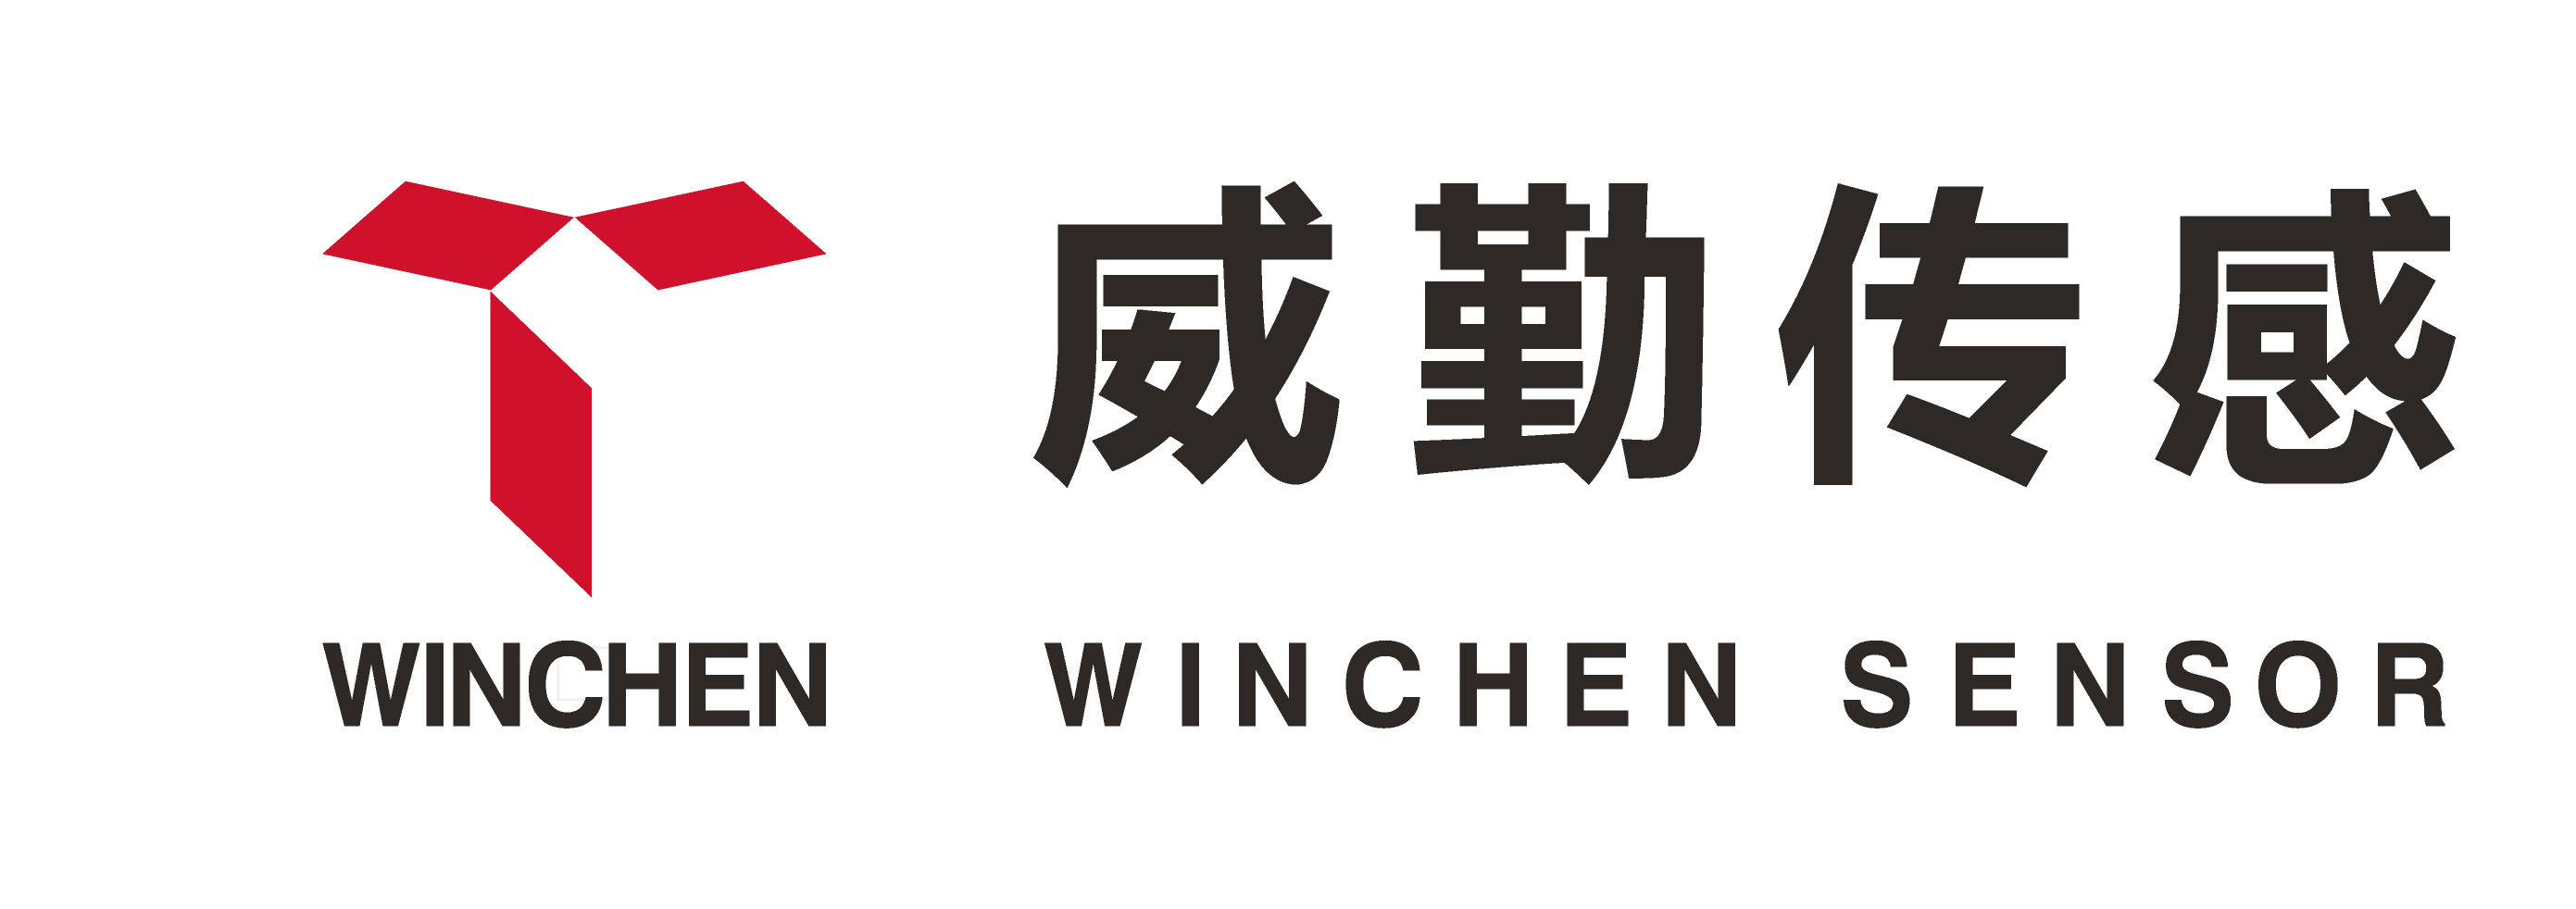 Focus on sensors, Internet of things communication modules, module power supply R & D and production - Shenzhen Winchen Electronic Technology Co., LTD.